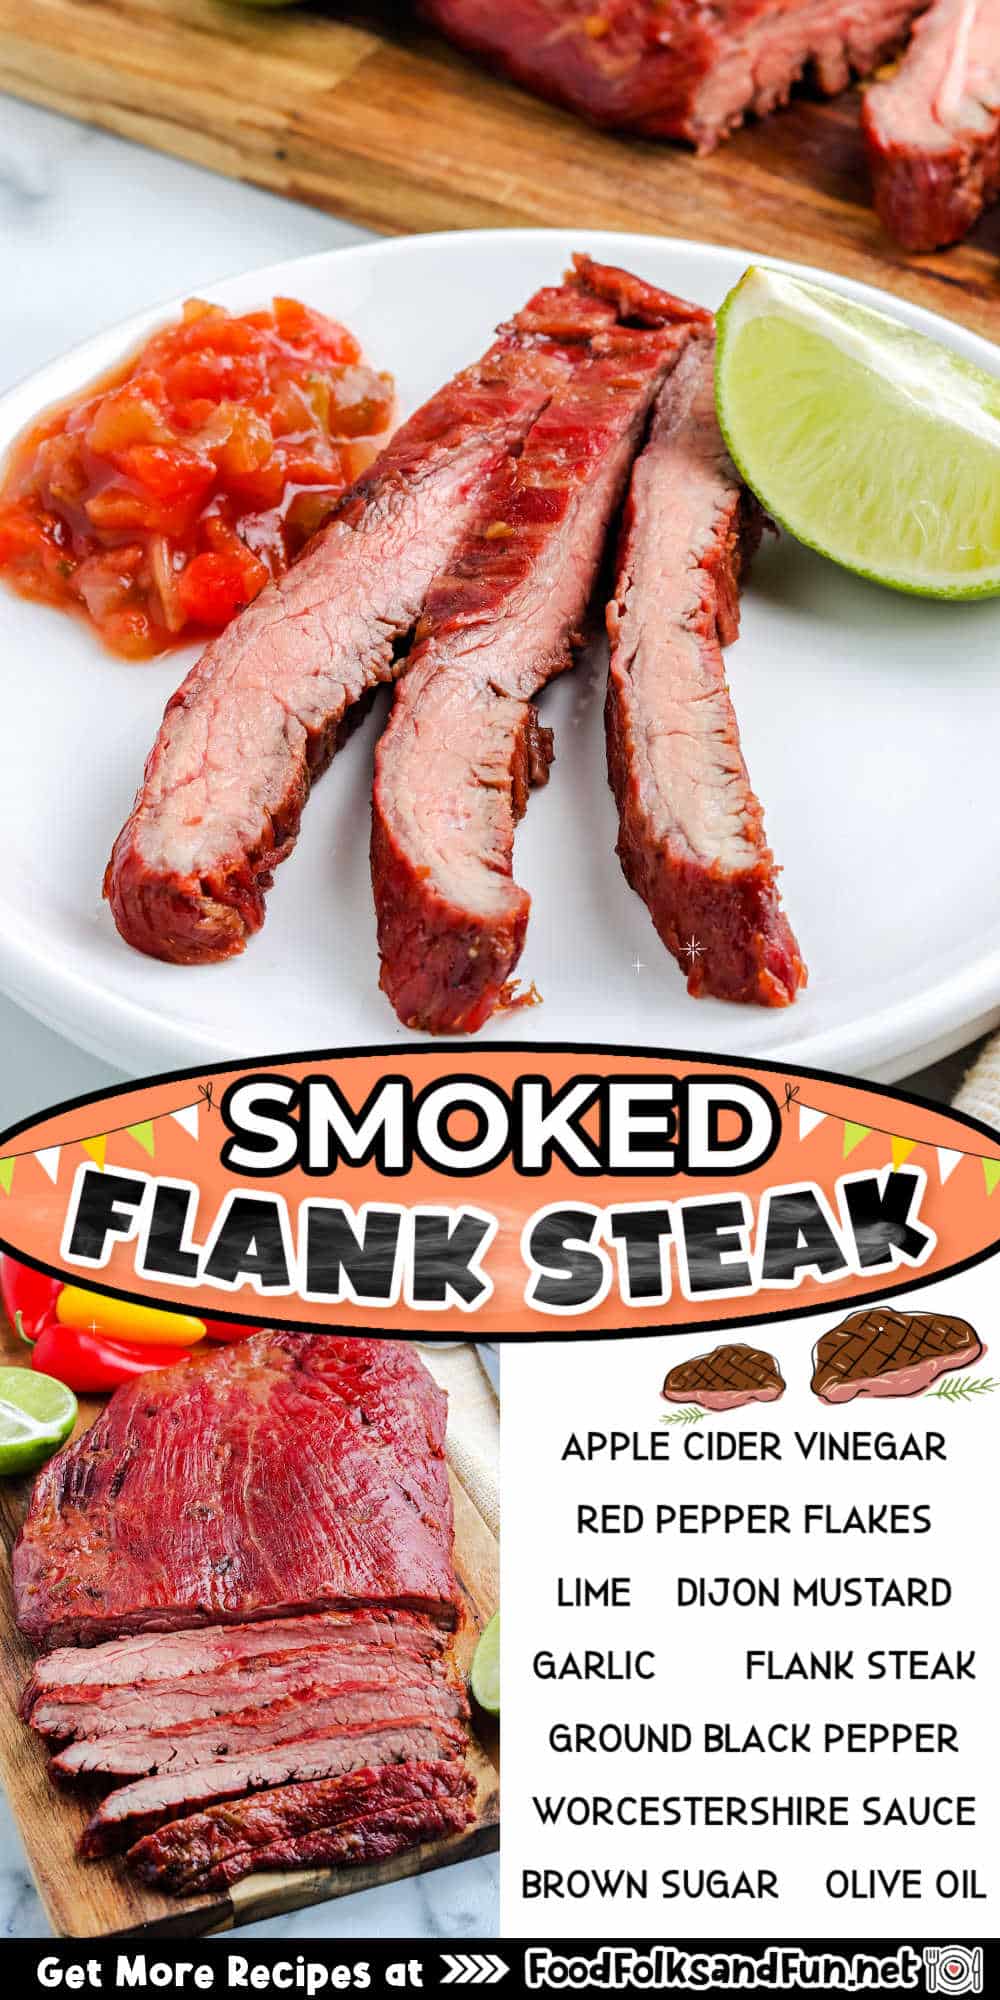 Smoked flank steak is a lovely, lean meat cooked perfectly on your Traeger grill. You can serve the steak alone or in tacos and fajitas. via @foodfolksandfun